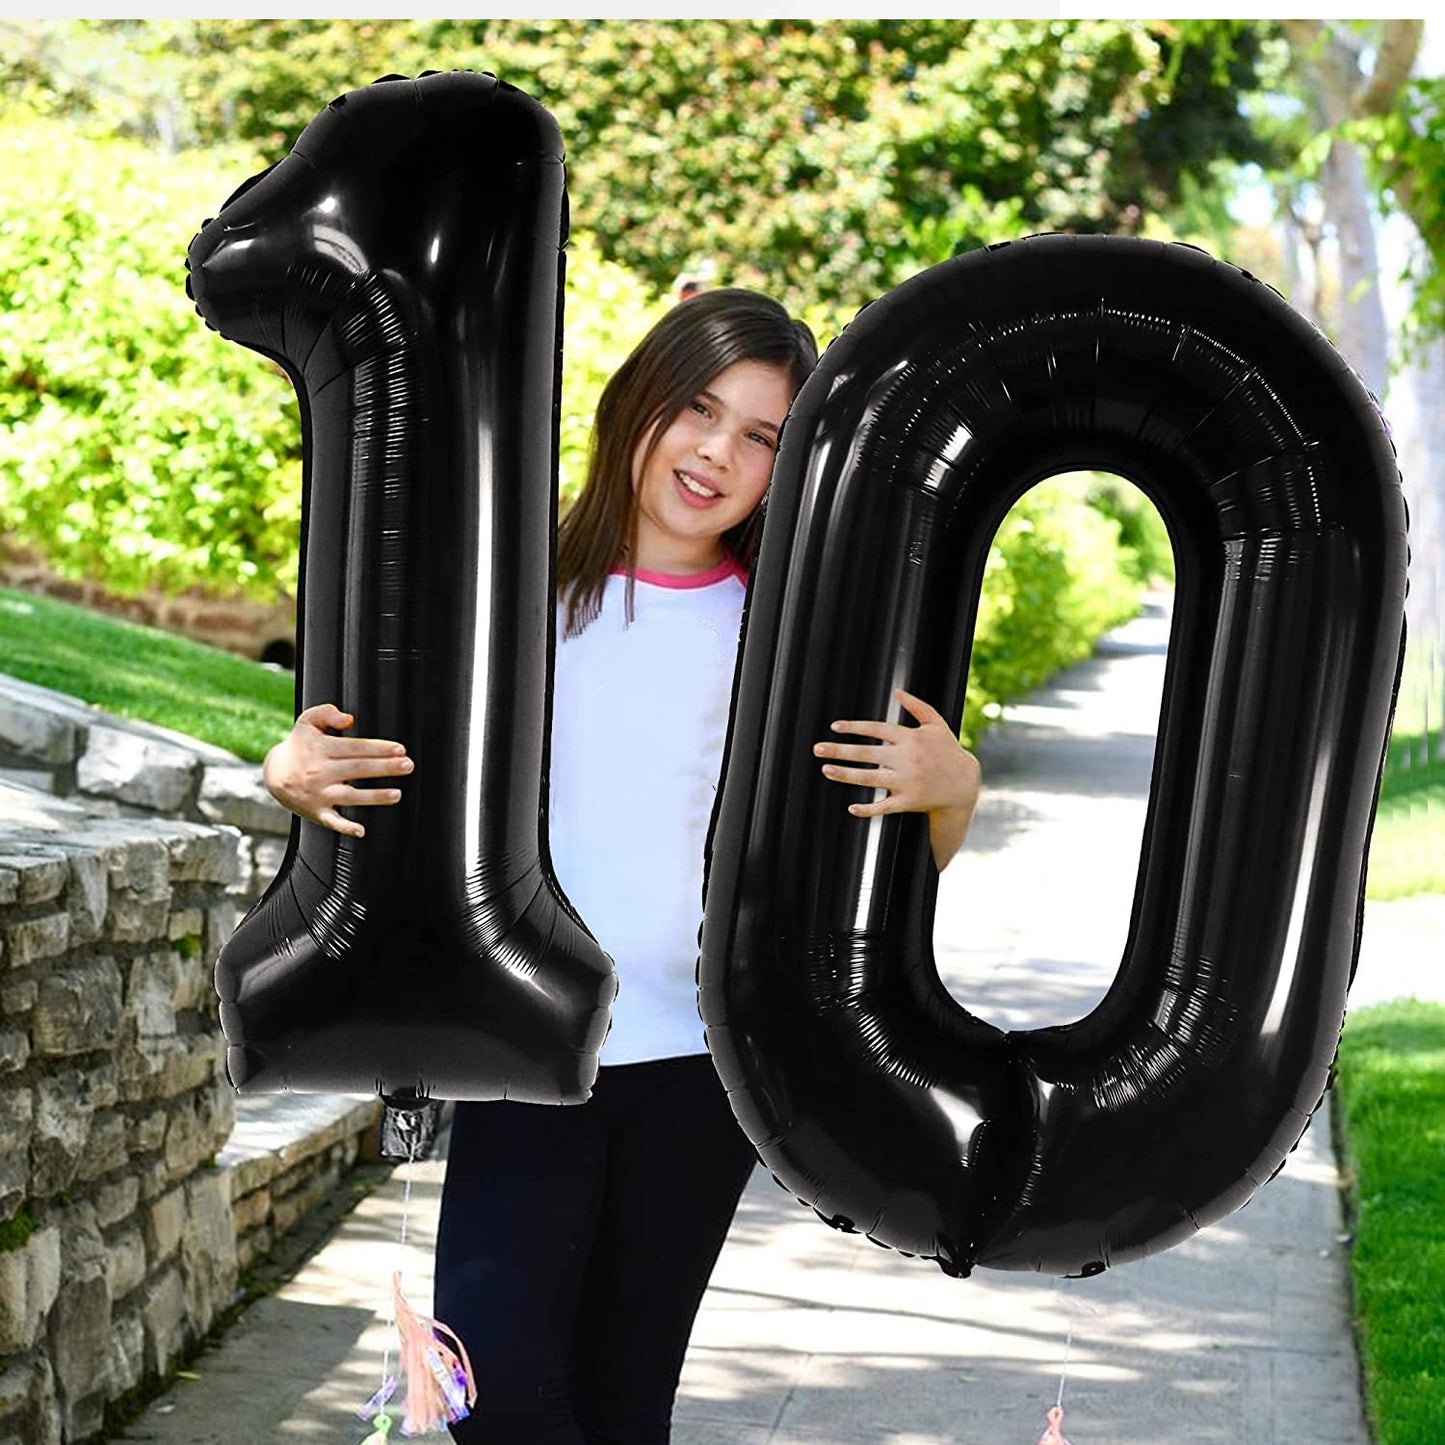 Number 7 Black Foil Balloon 40 Inches